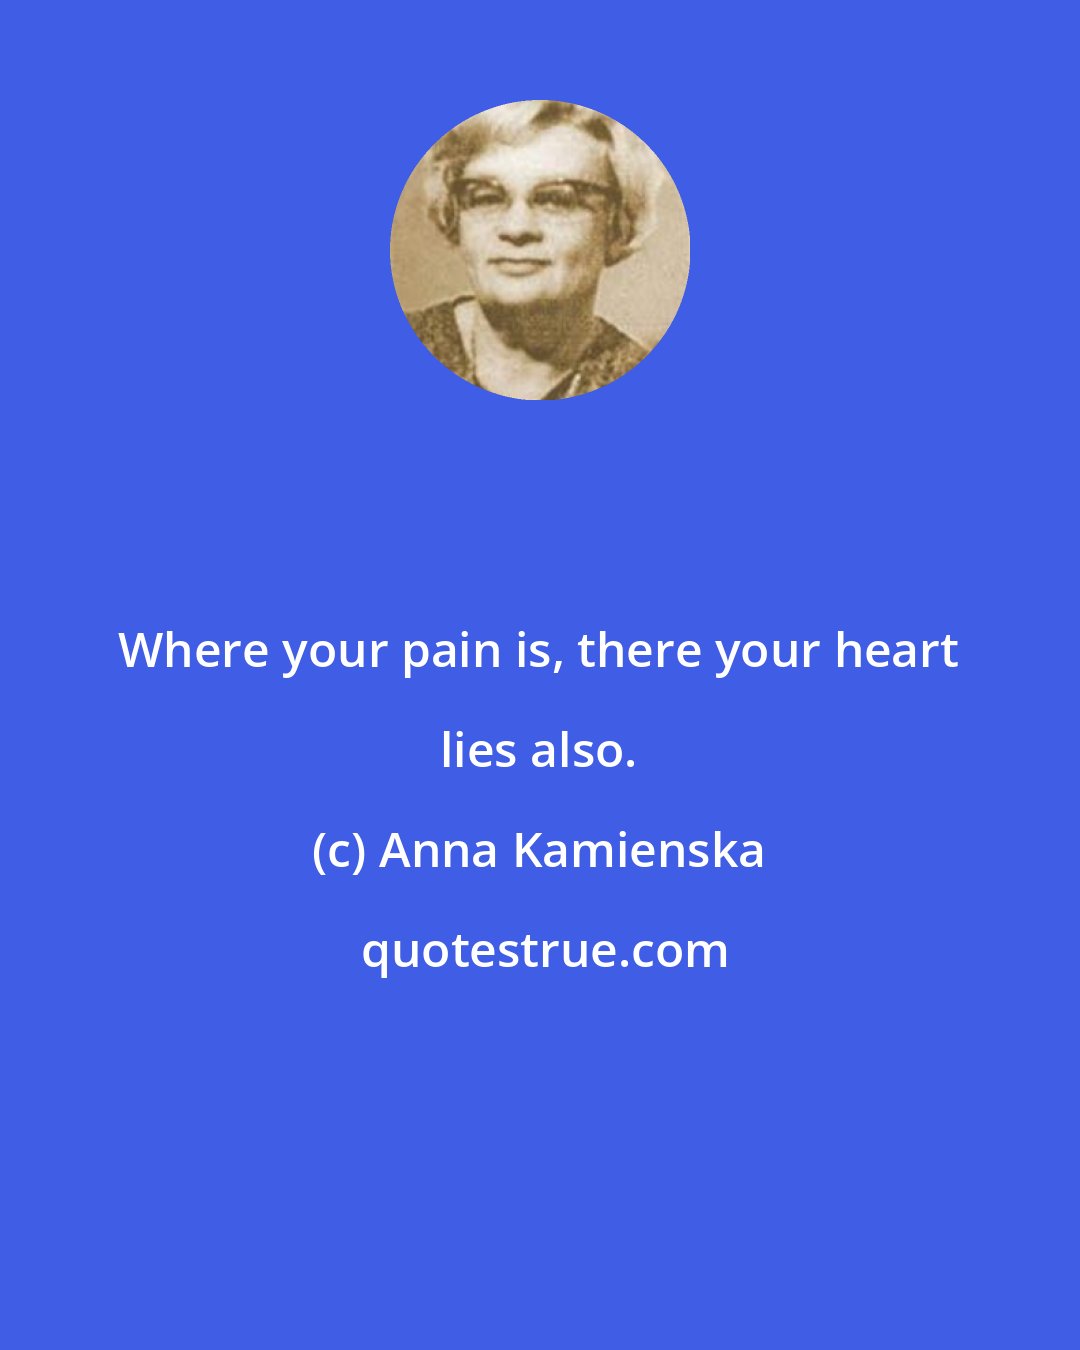 Anna Kamienska: Where your pain is, there your heart lies also.